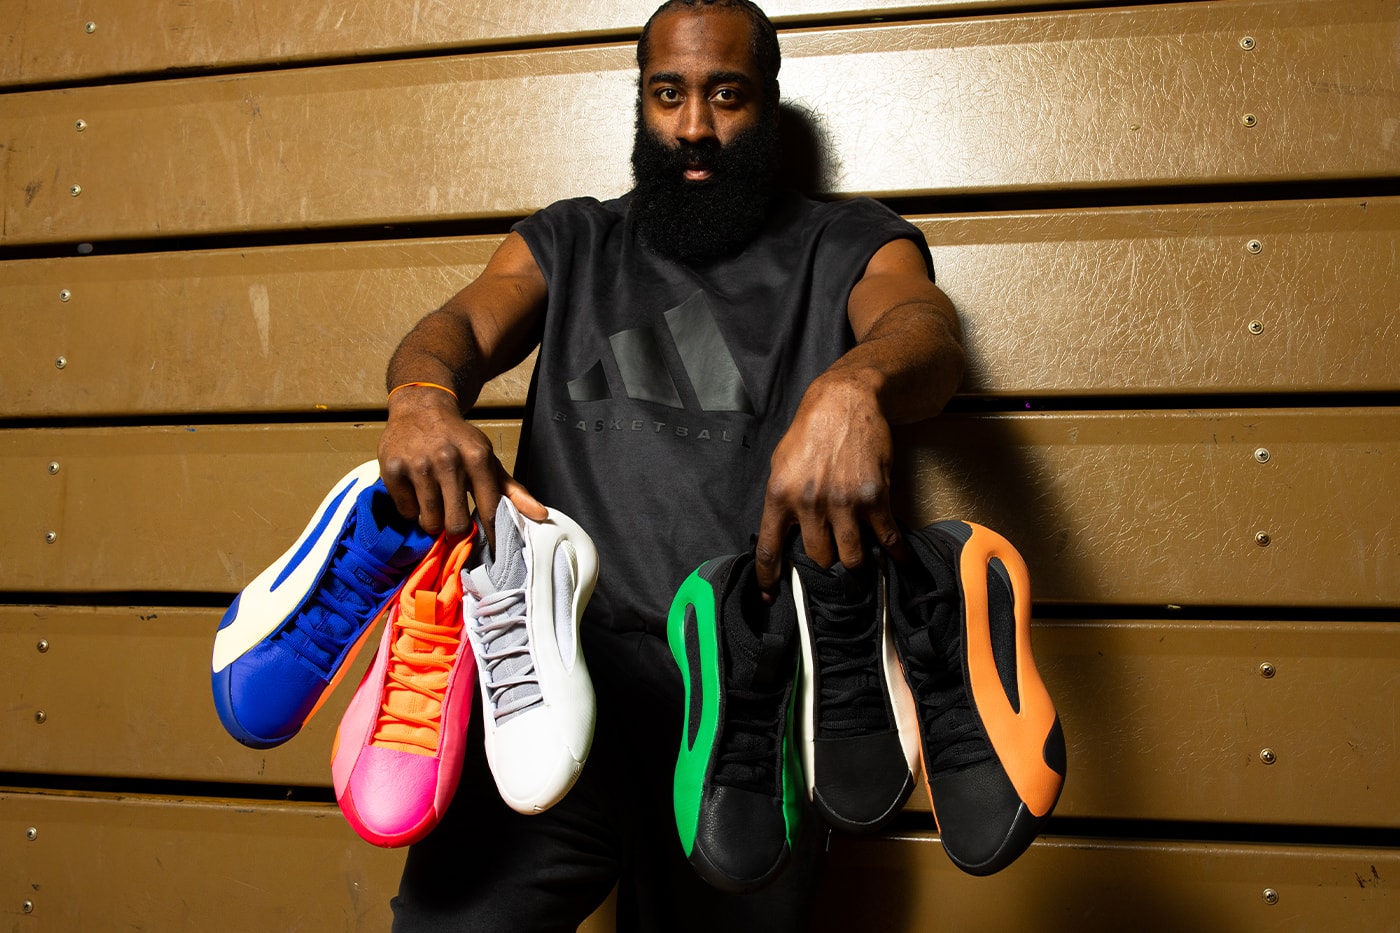 Adidas Basketball Officially Launches the Harden Vol. 8 james harden adiddas madison square garden november debut game los angeles clippers vibrant bright basketball nba on court off the court performance 